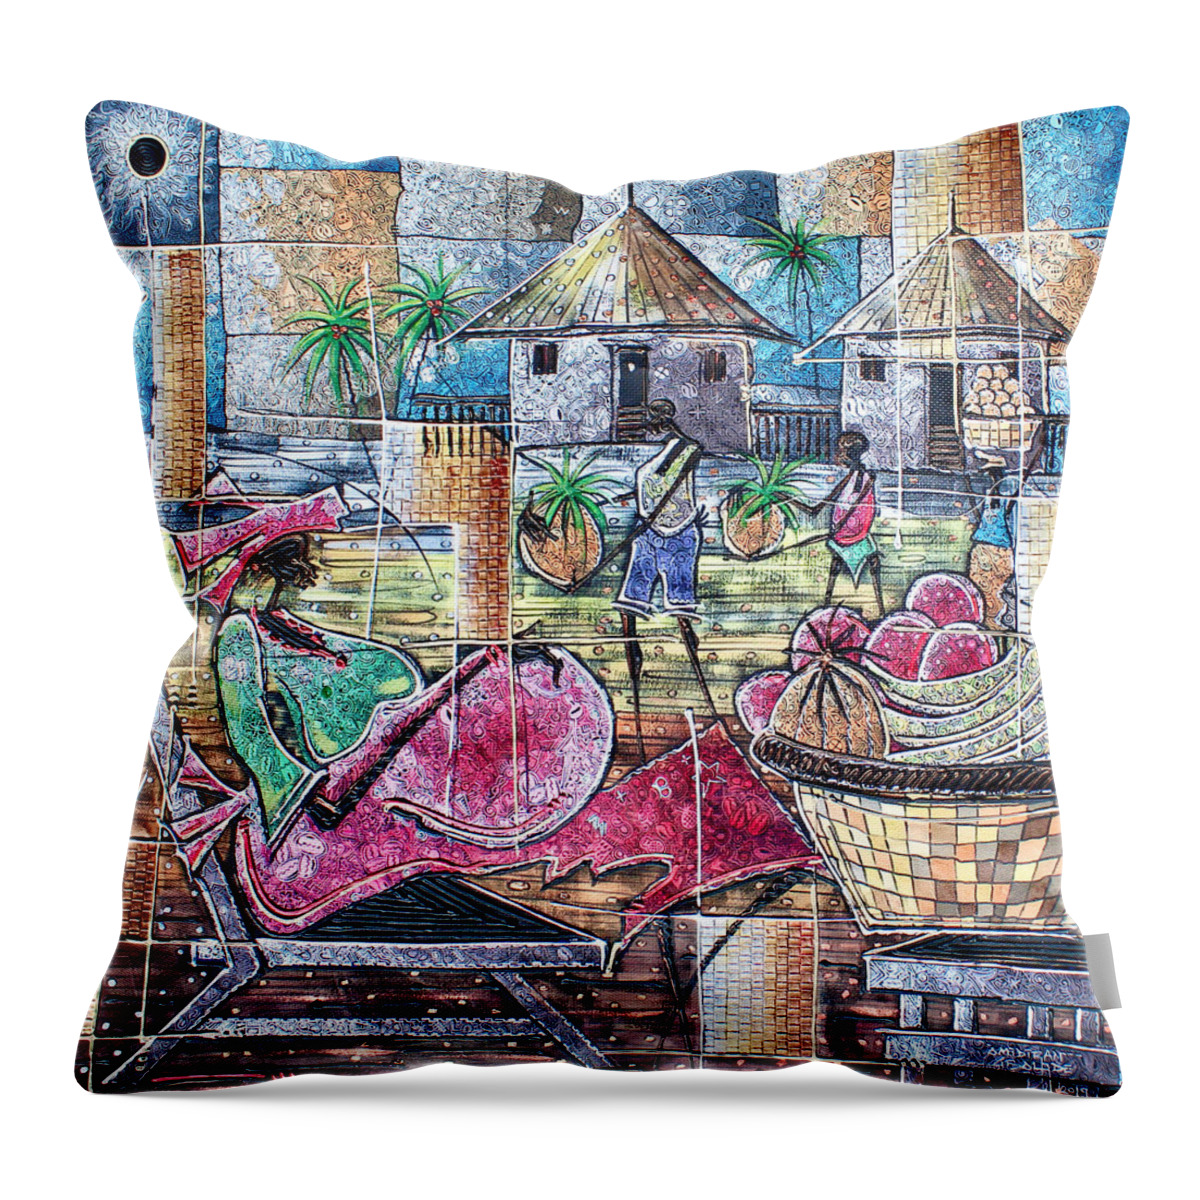 Africa Throw Pillow featuring the painting Fruit Selling Village by Paul Gbolade Omidiran